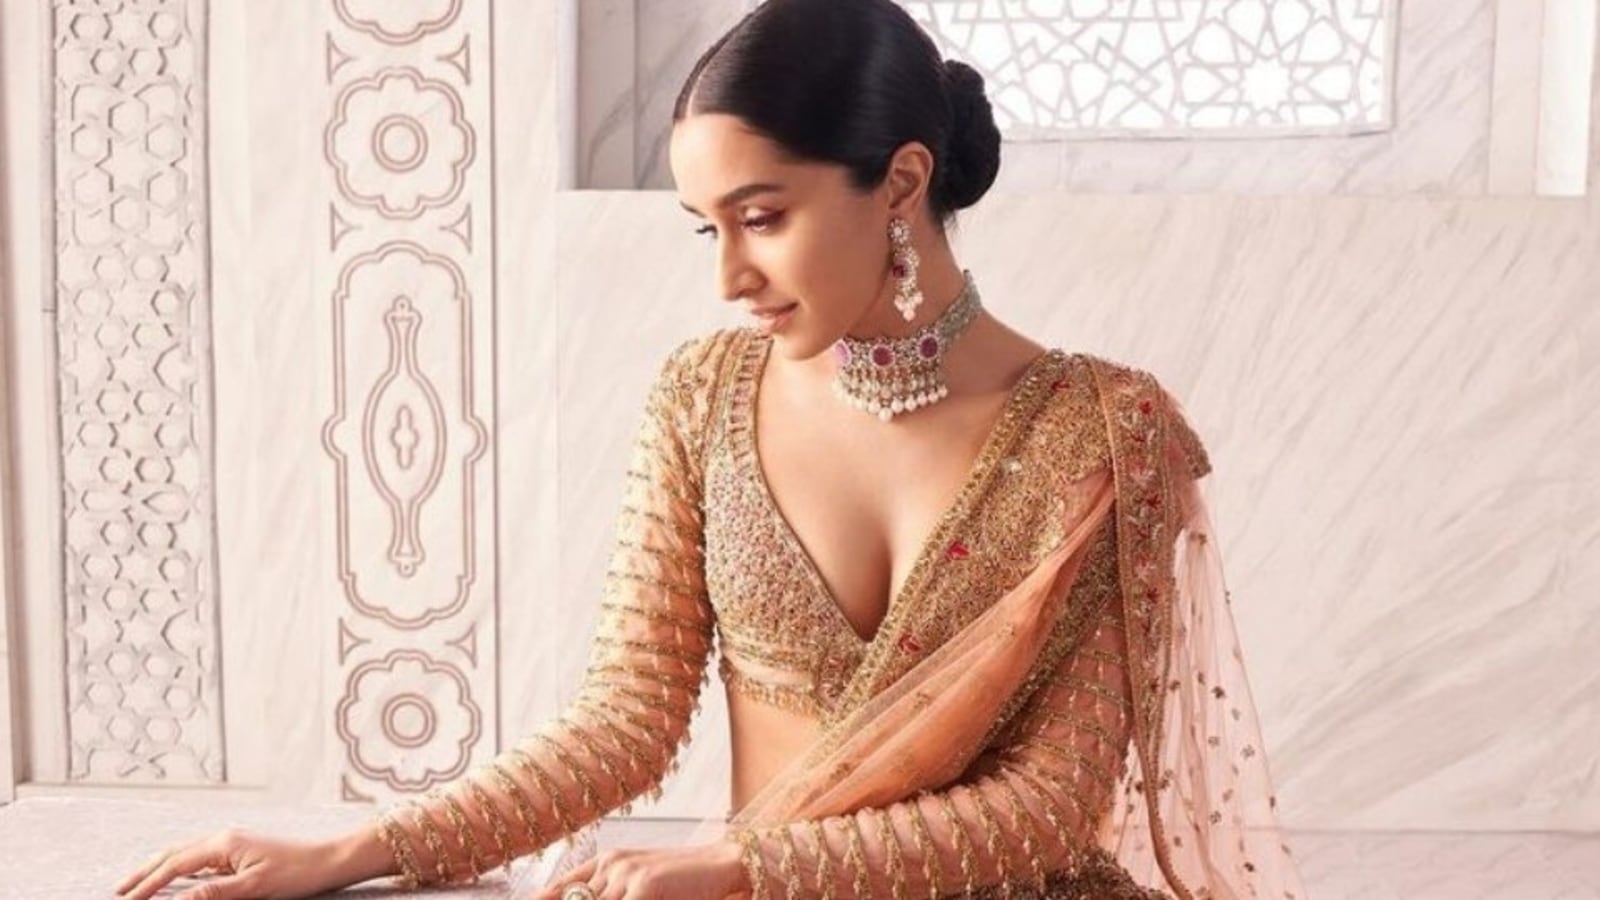 Sarda Kapor Xxx Video - Shraddha Kapoor in coral lehenga and plunging-neck blouse serves regal look  for the modern bride | Fashion Trends - Hindustan Times